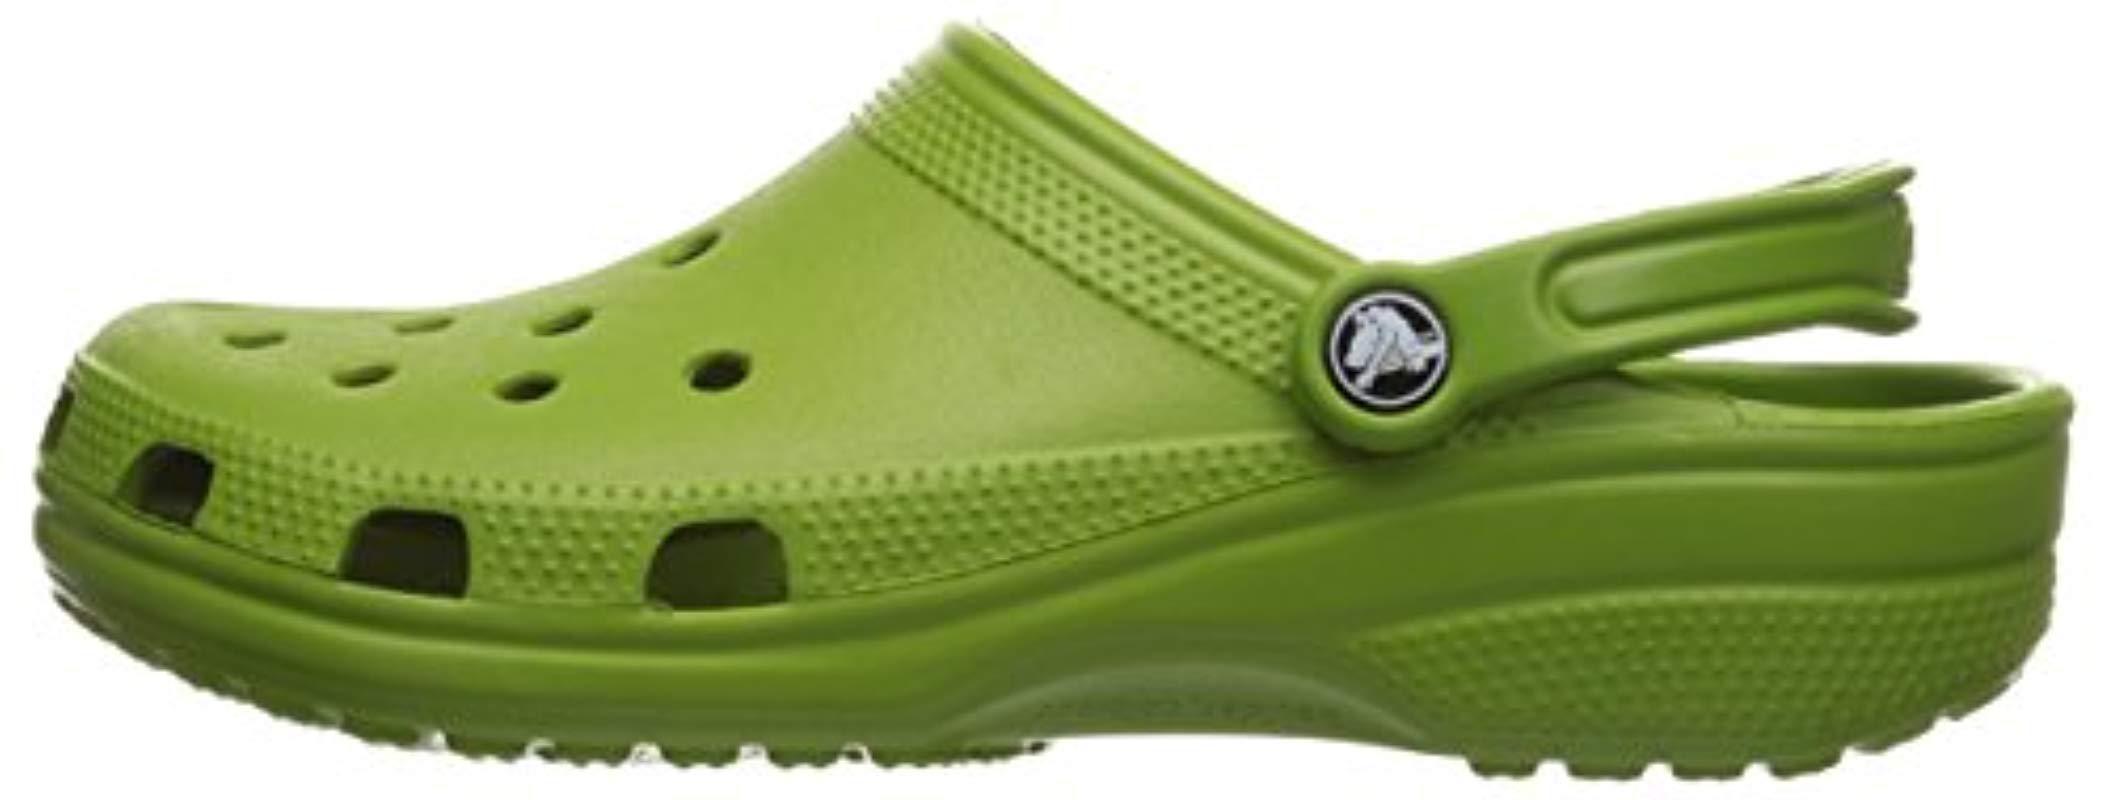 Crocs™ Unisex Adults' Classic Clogs in Green for Men - Lyst